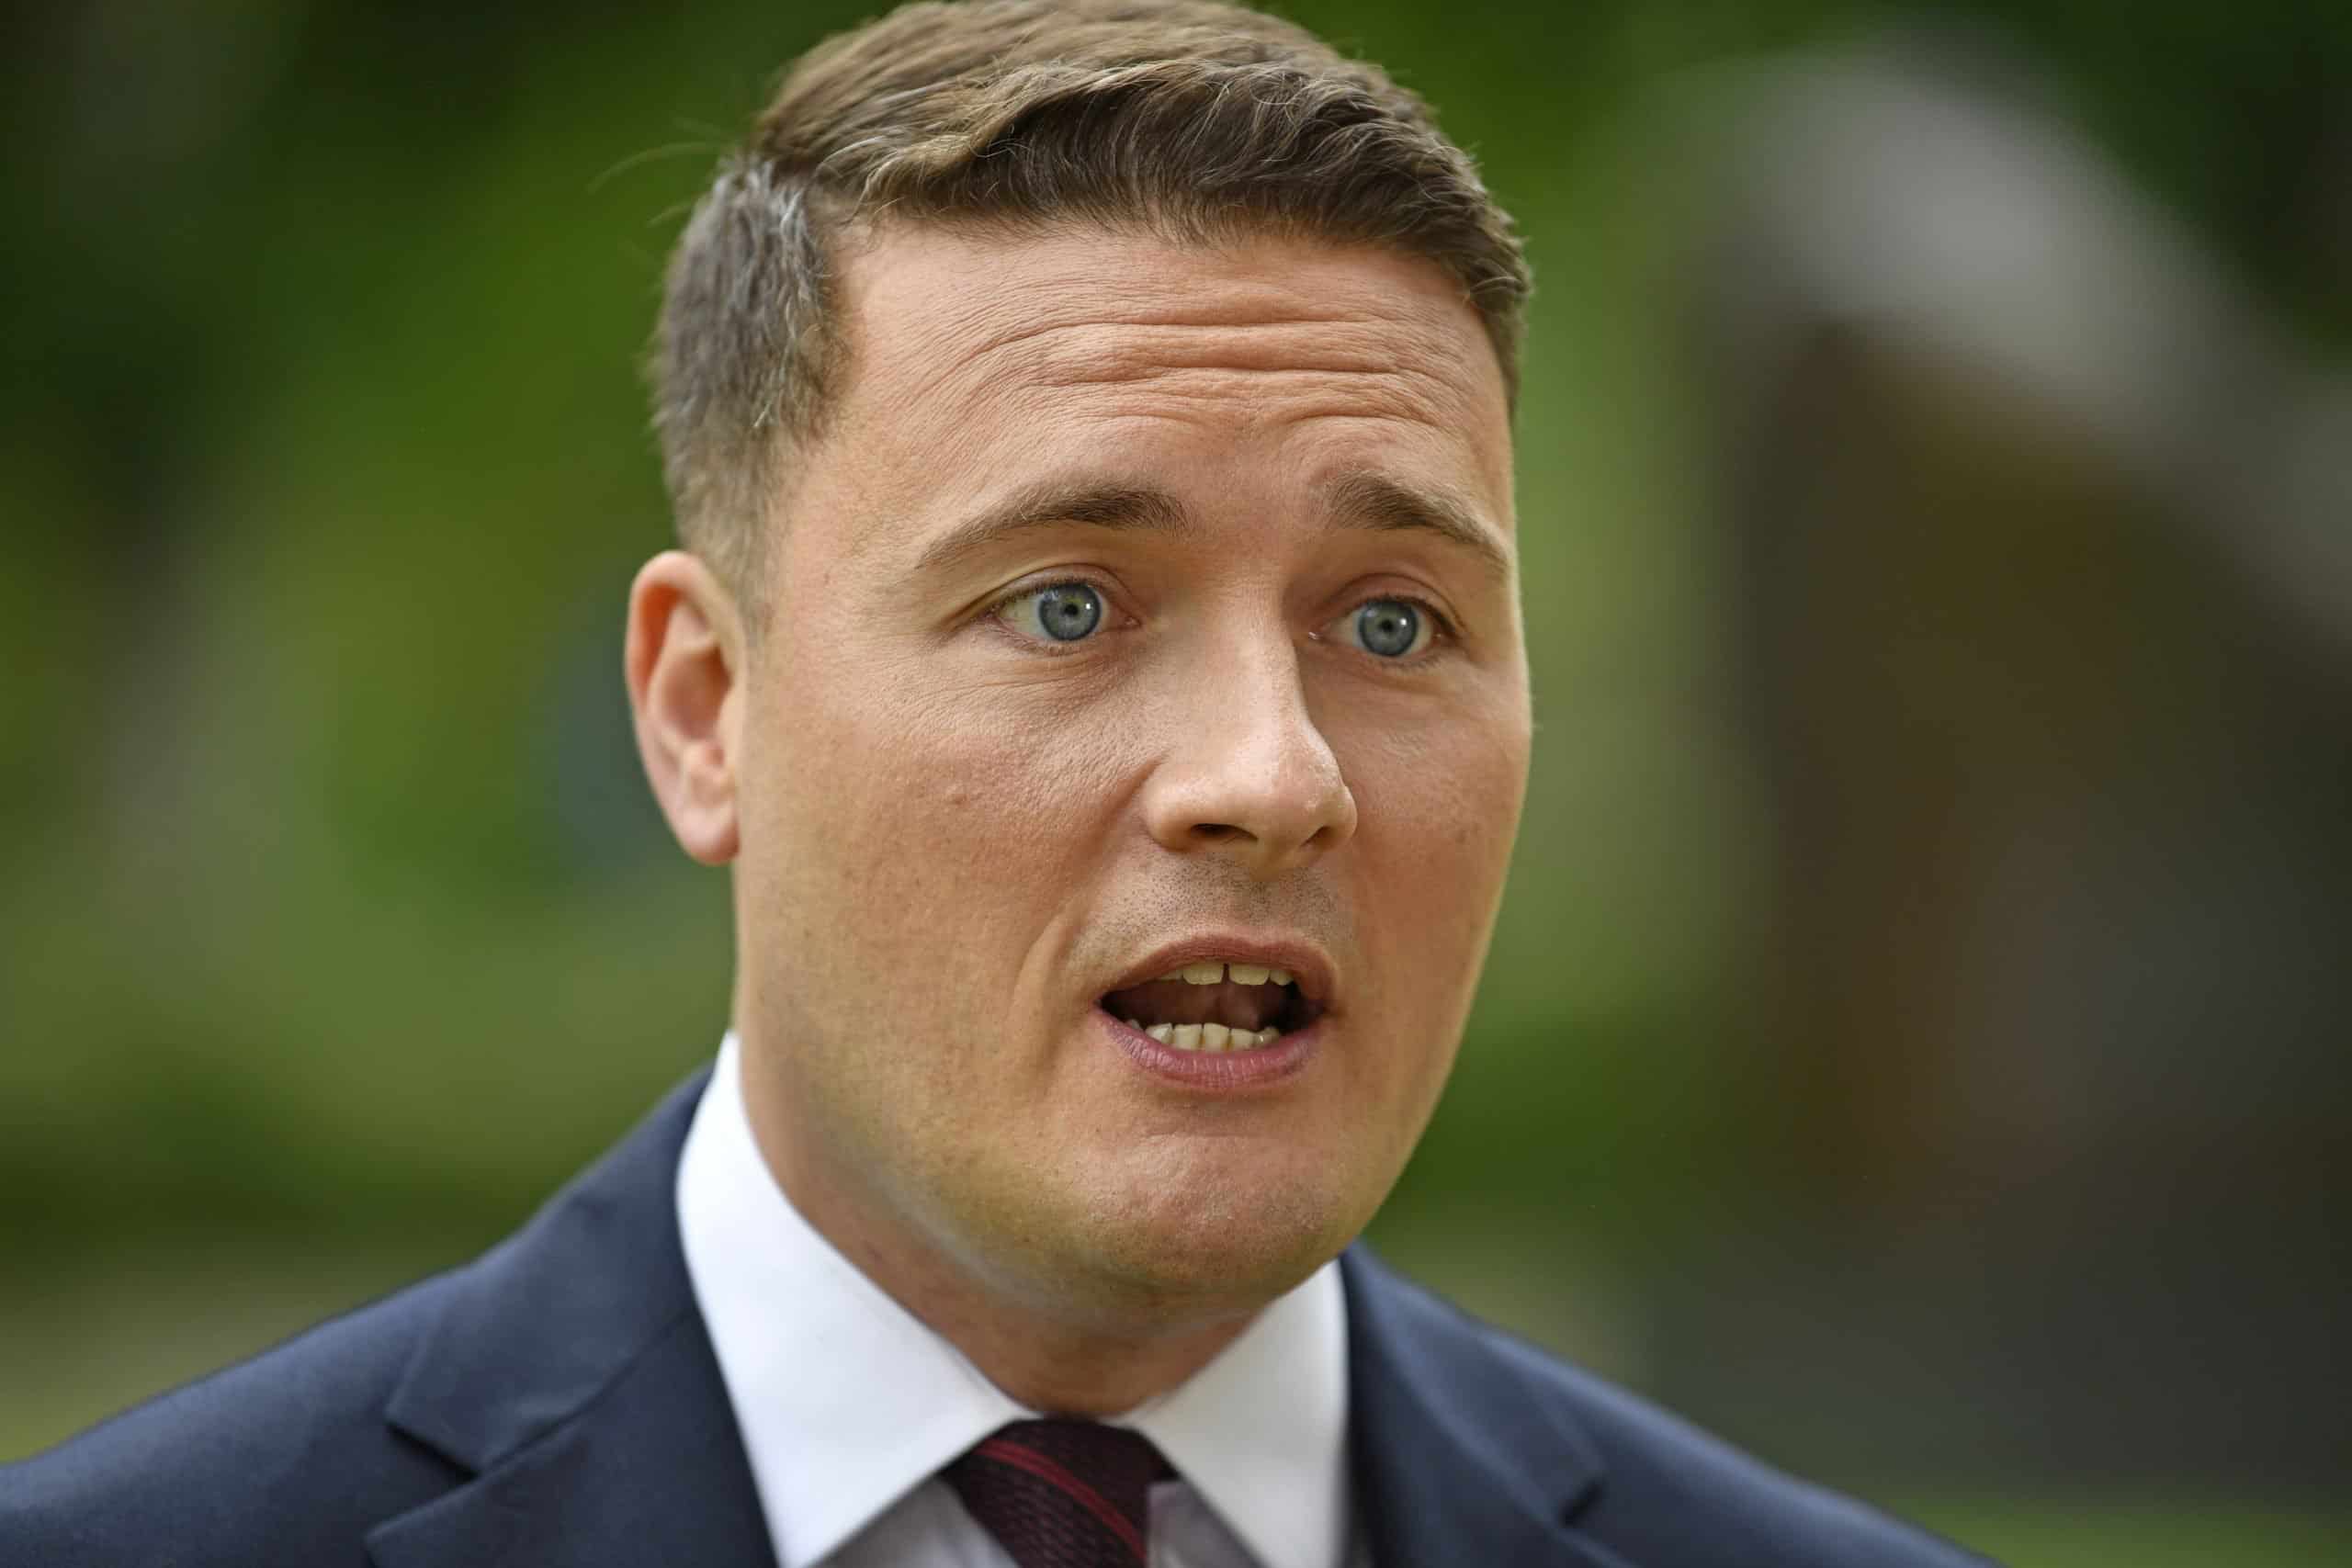 Labour ‘not entertaining’ a coalition with the Lib Dems – Streeting